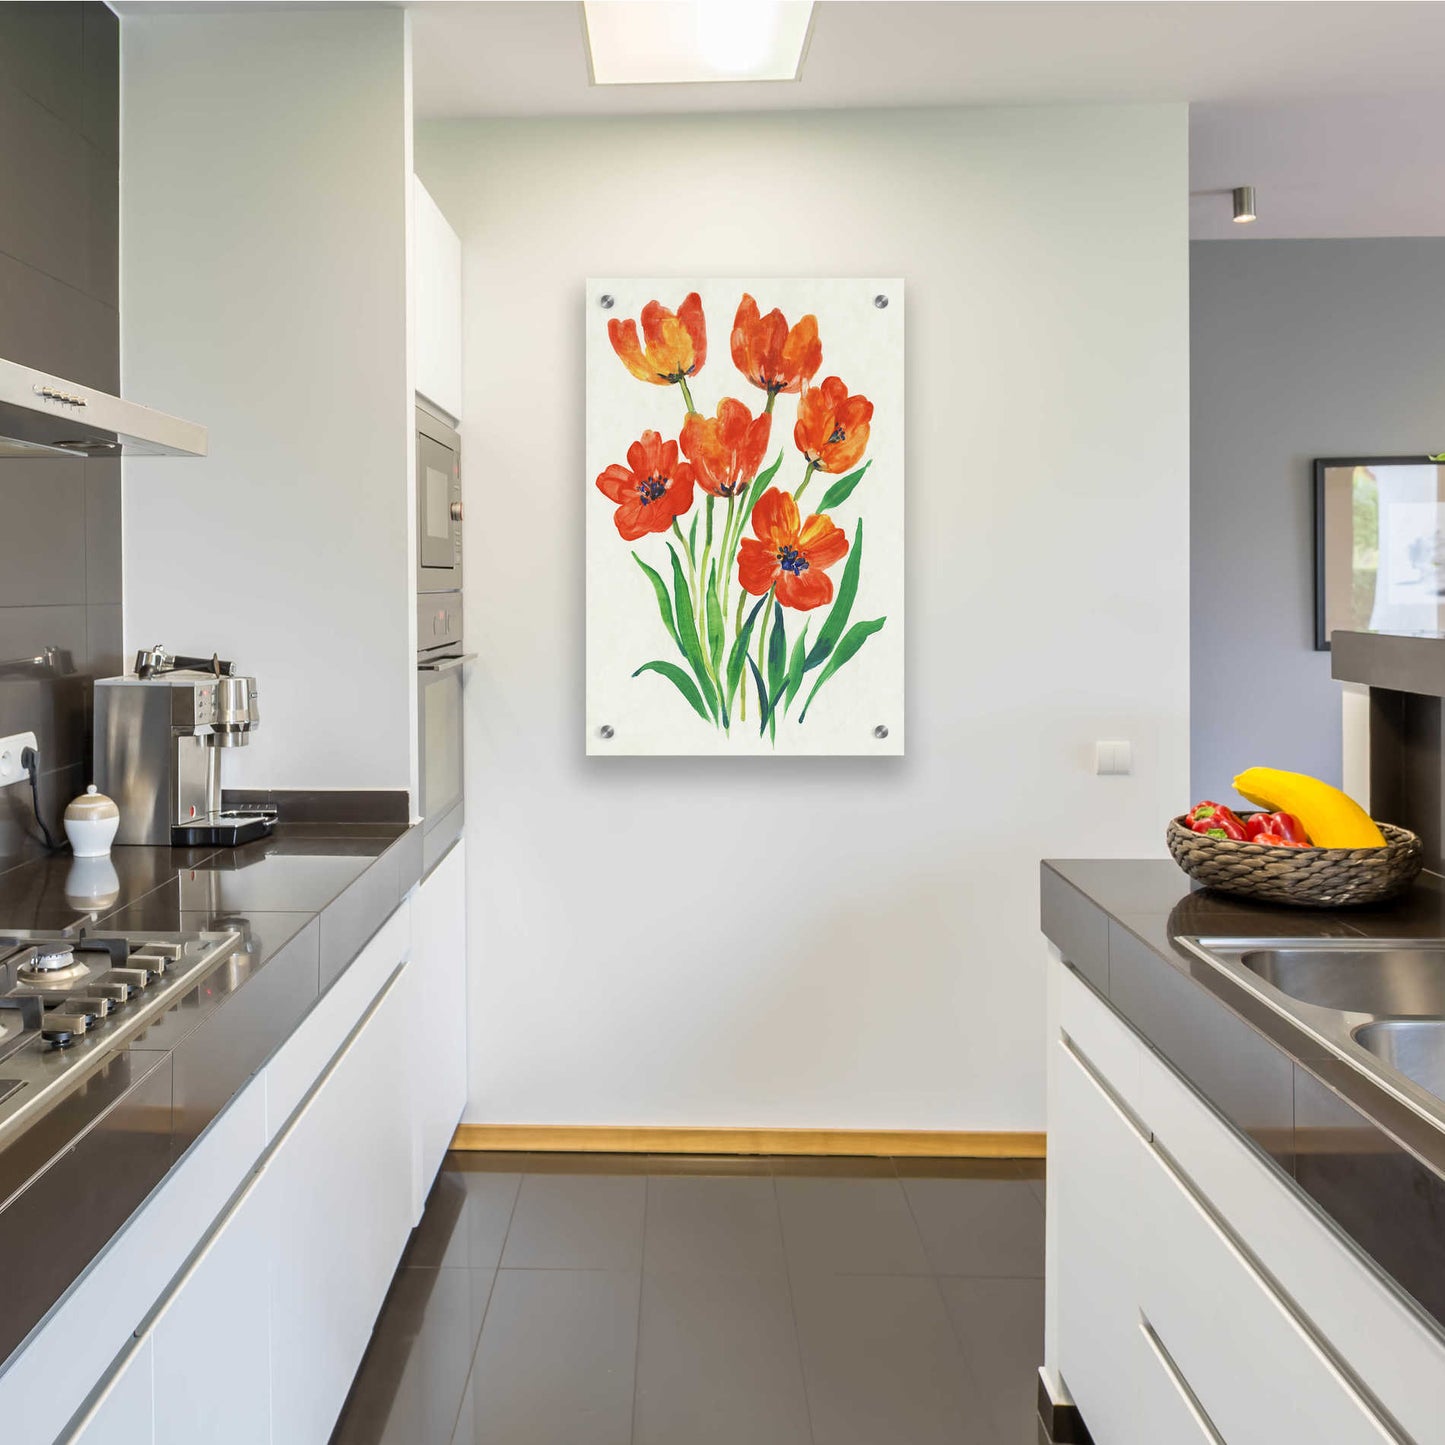 Epic Art 'Red Tulips in Bloom II' by Tim O'Toole, Acrylic Glass Wall Art,24x36